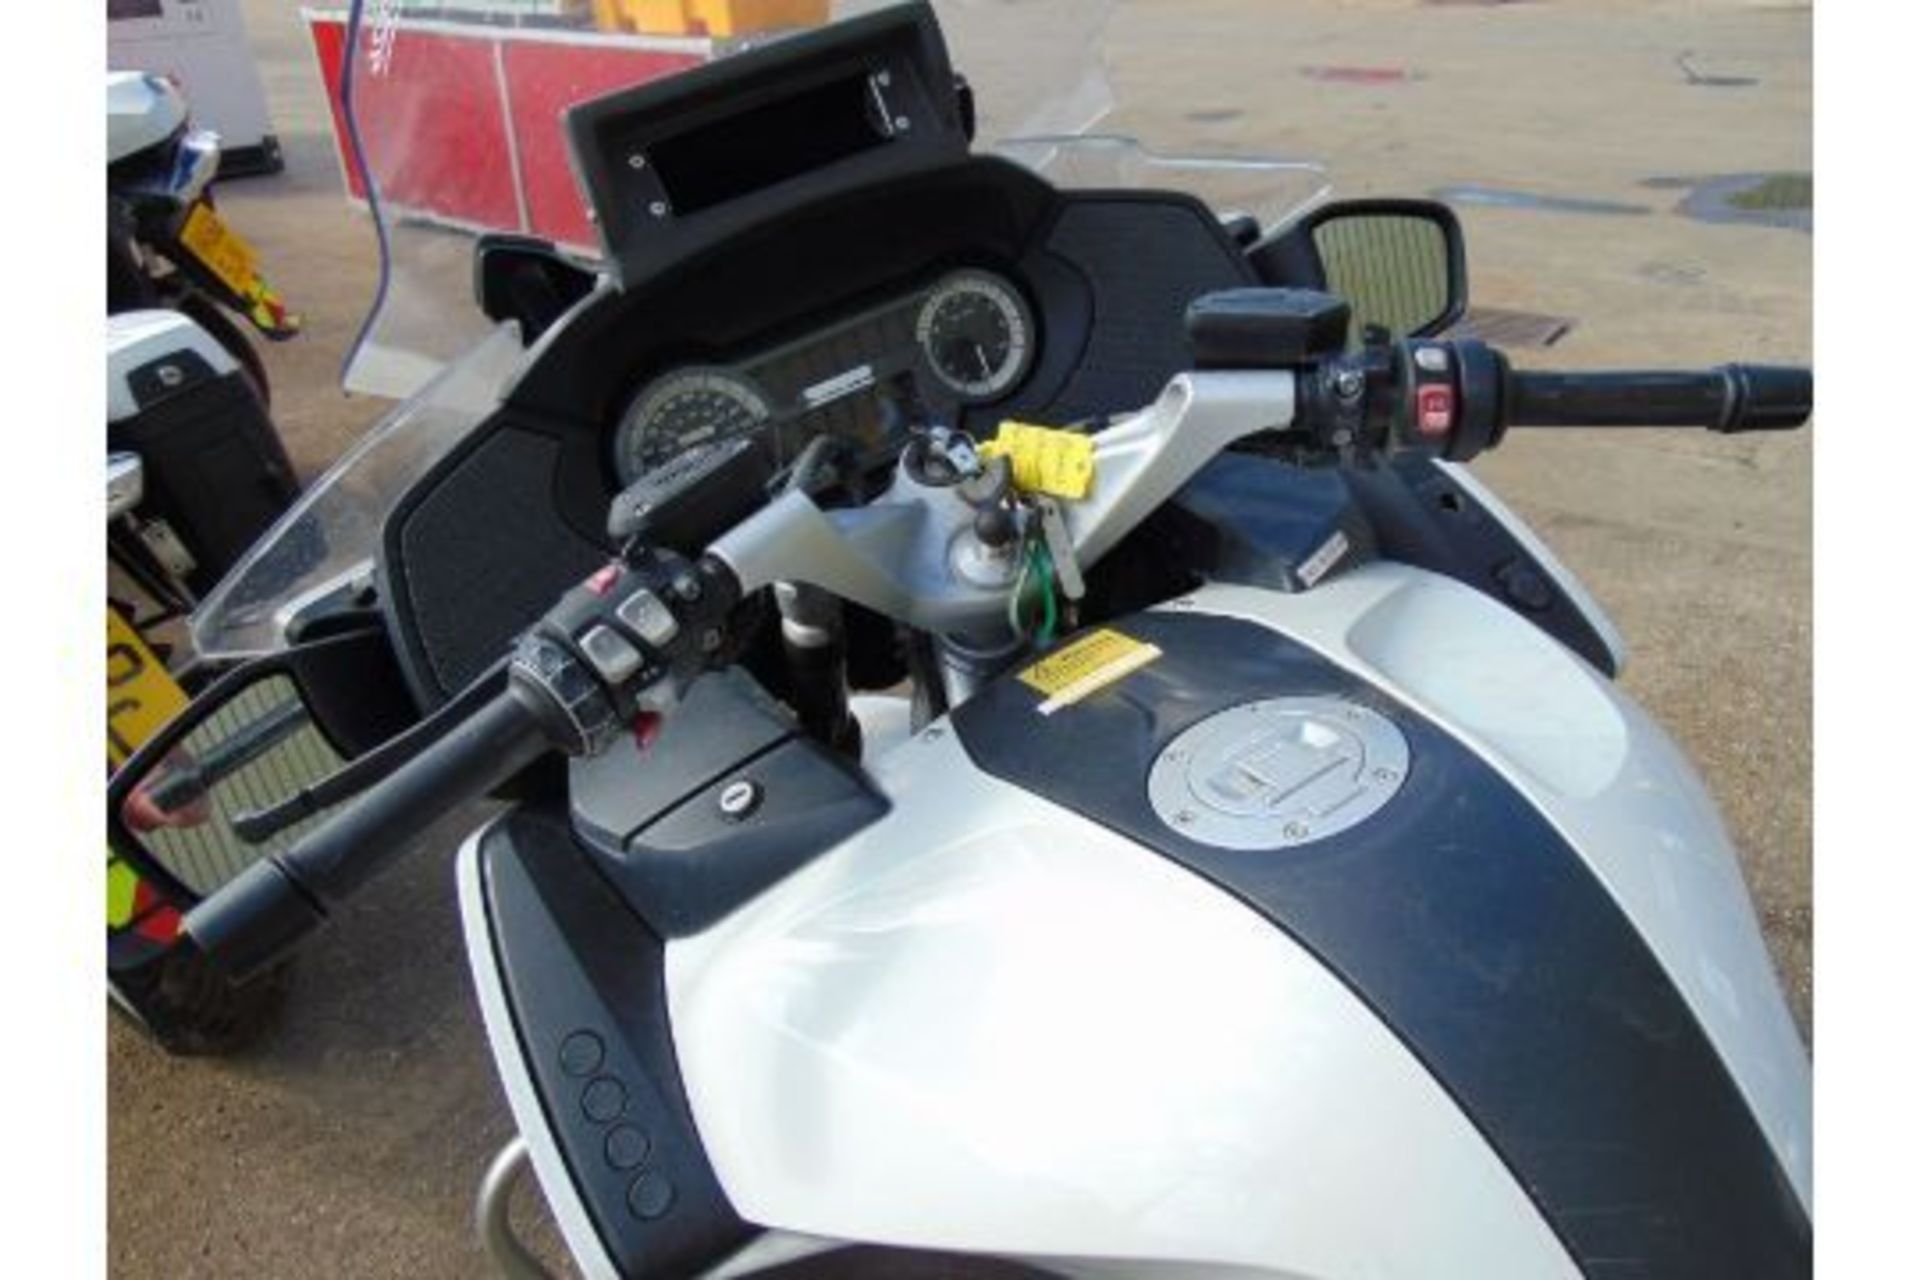 2015 BMW R1200RT Motorbike - Recent release from UK Police - Image 11 of 19